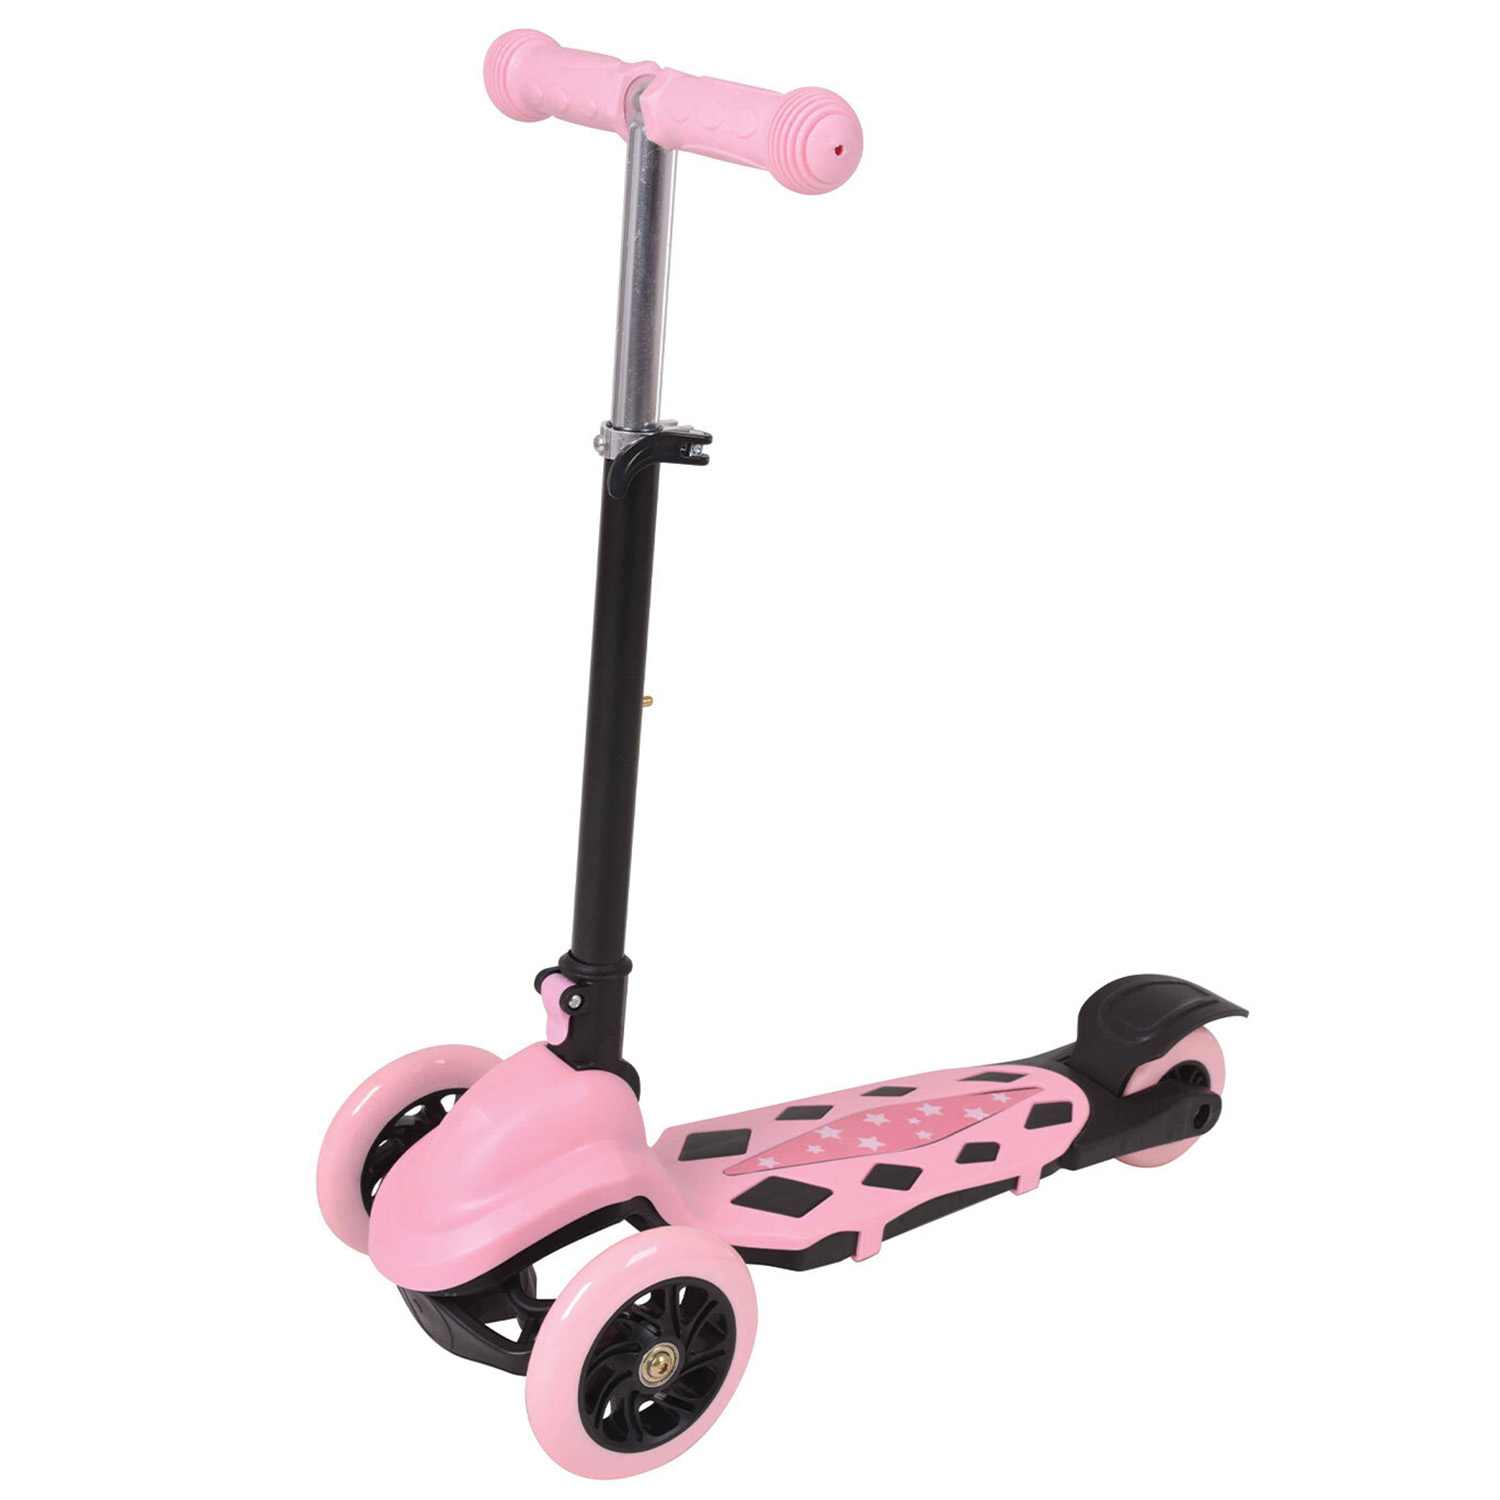 Kidz Outdoors Foldable Scooter Pink Image 1